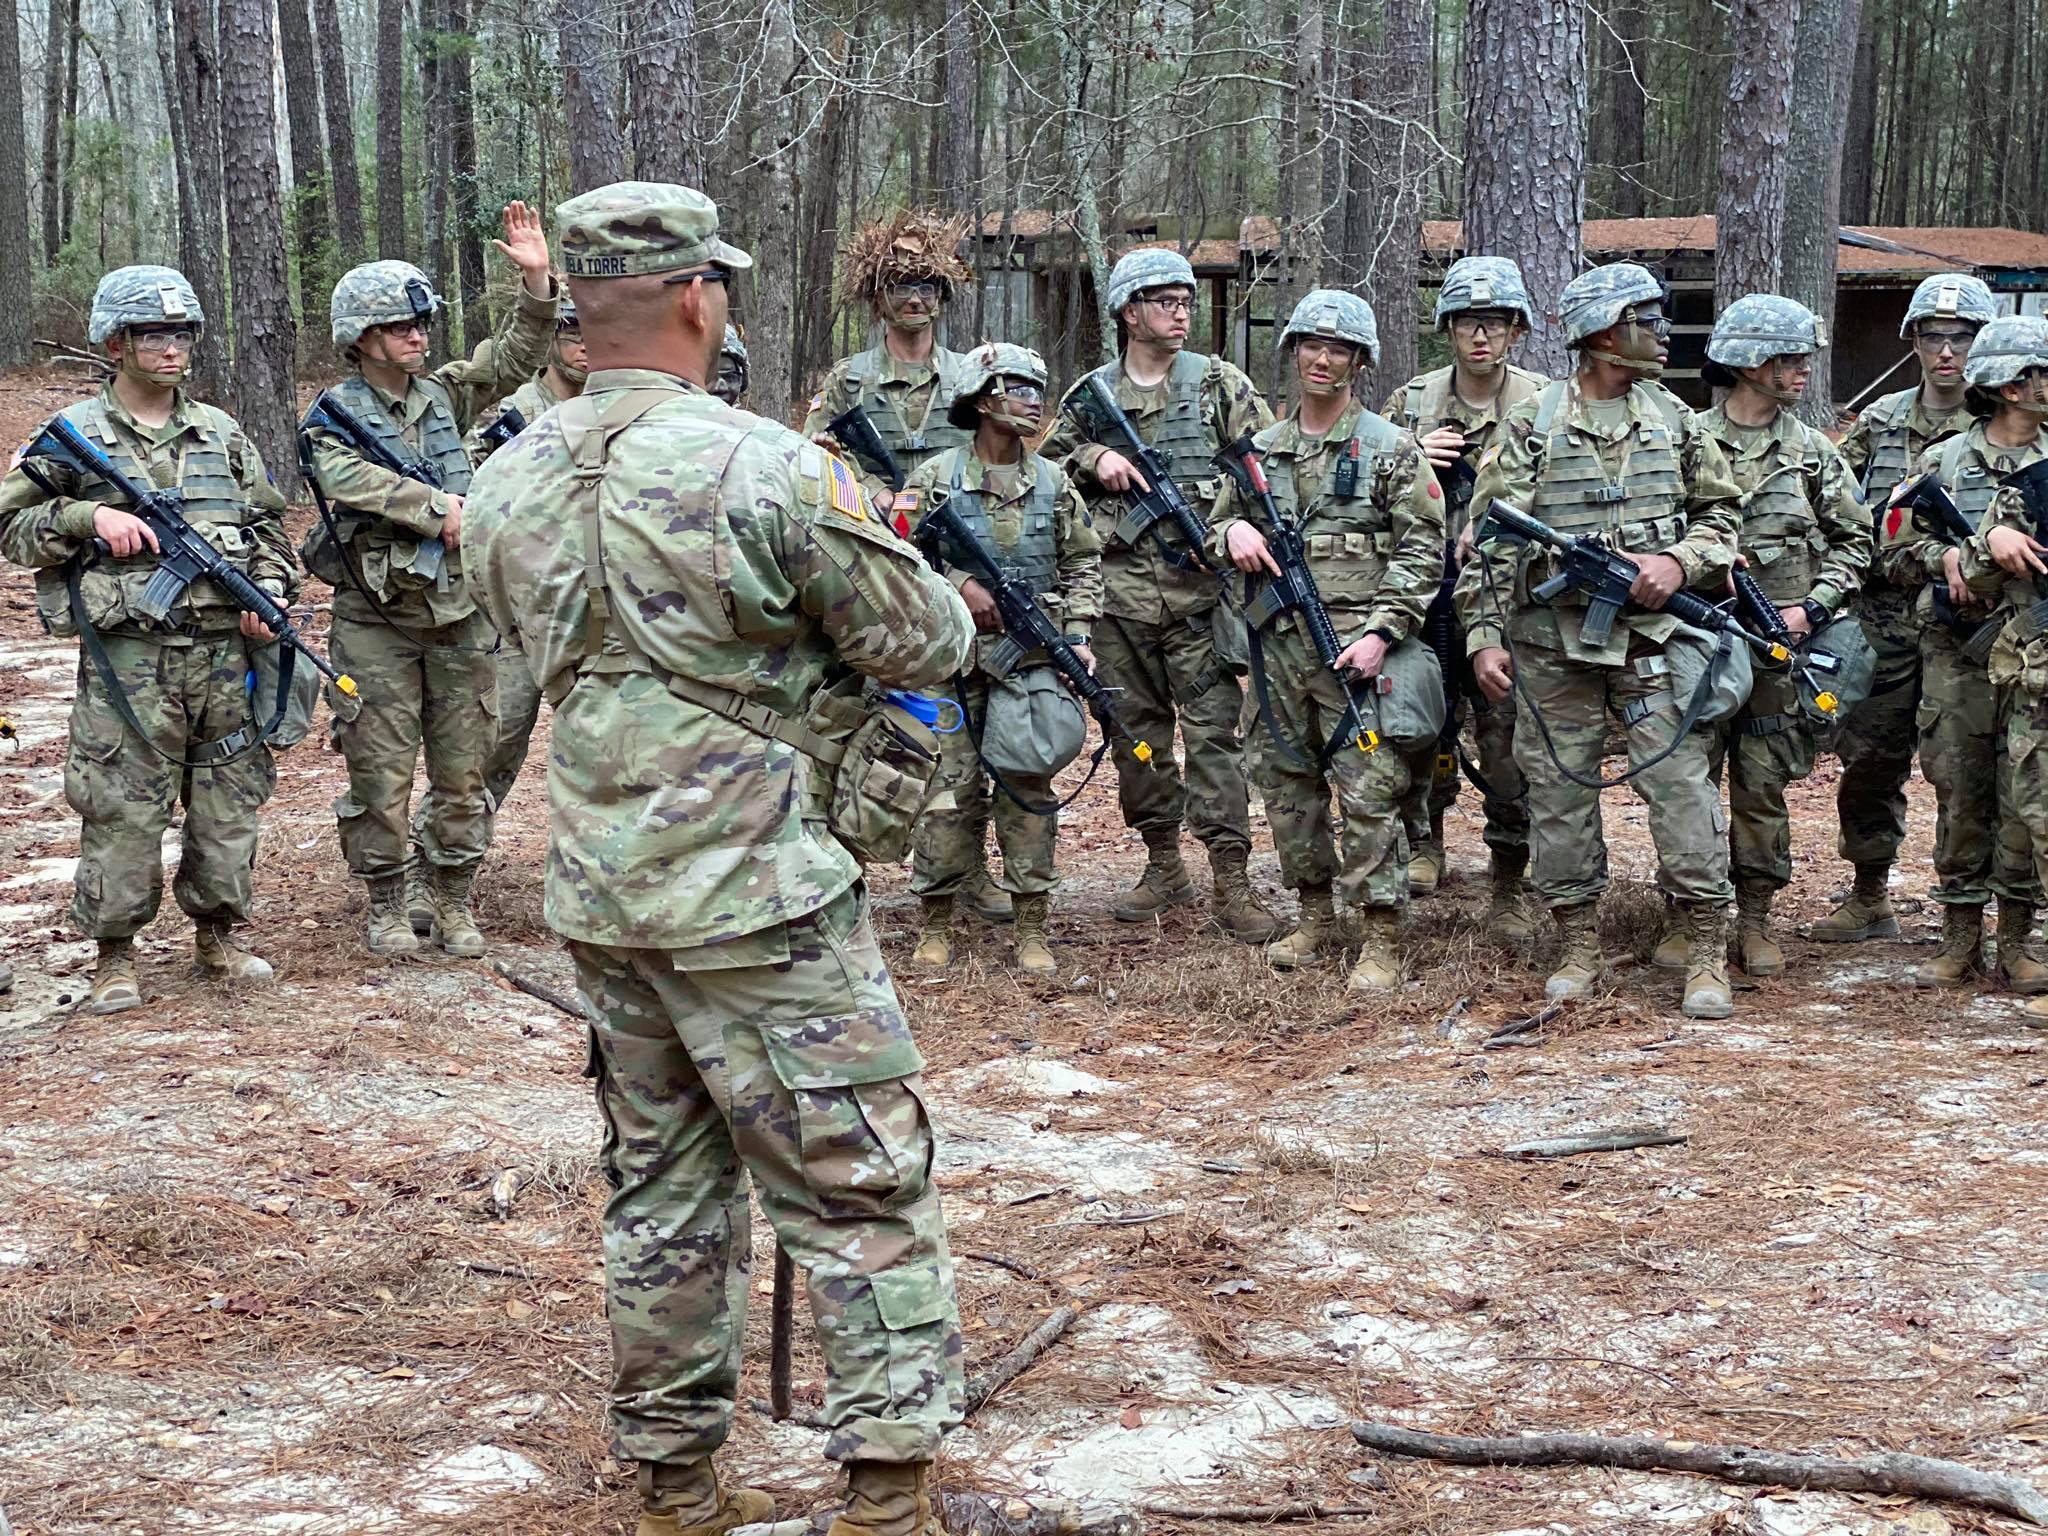 To become a soldier at Fort Jackson, U.S. Army recruits face